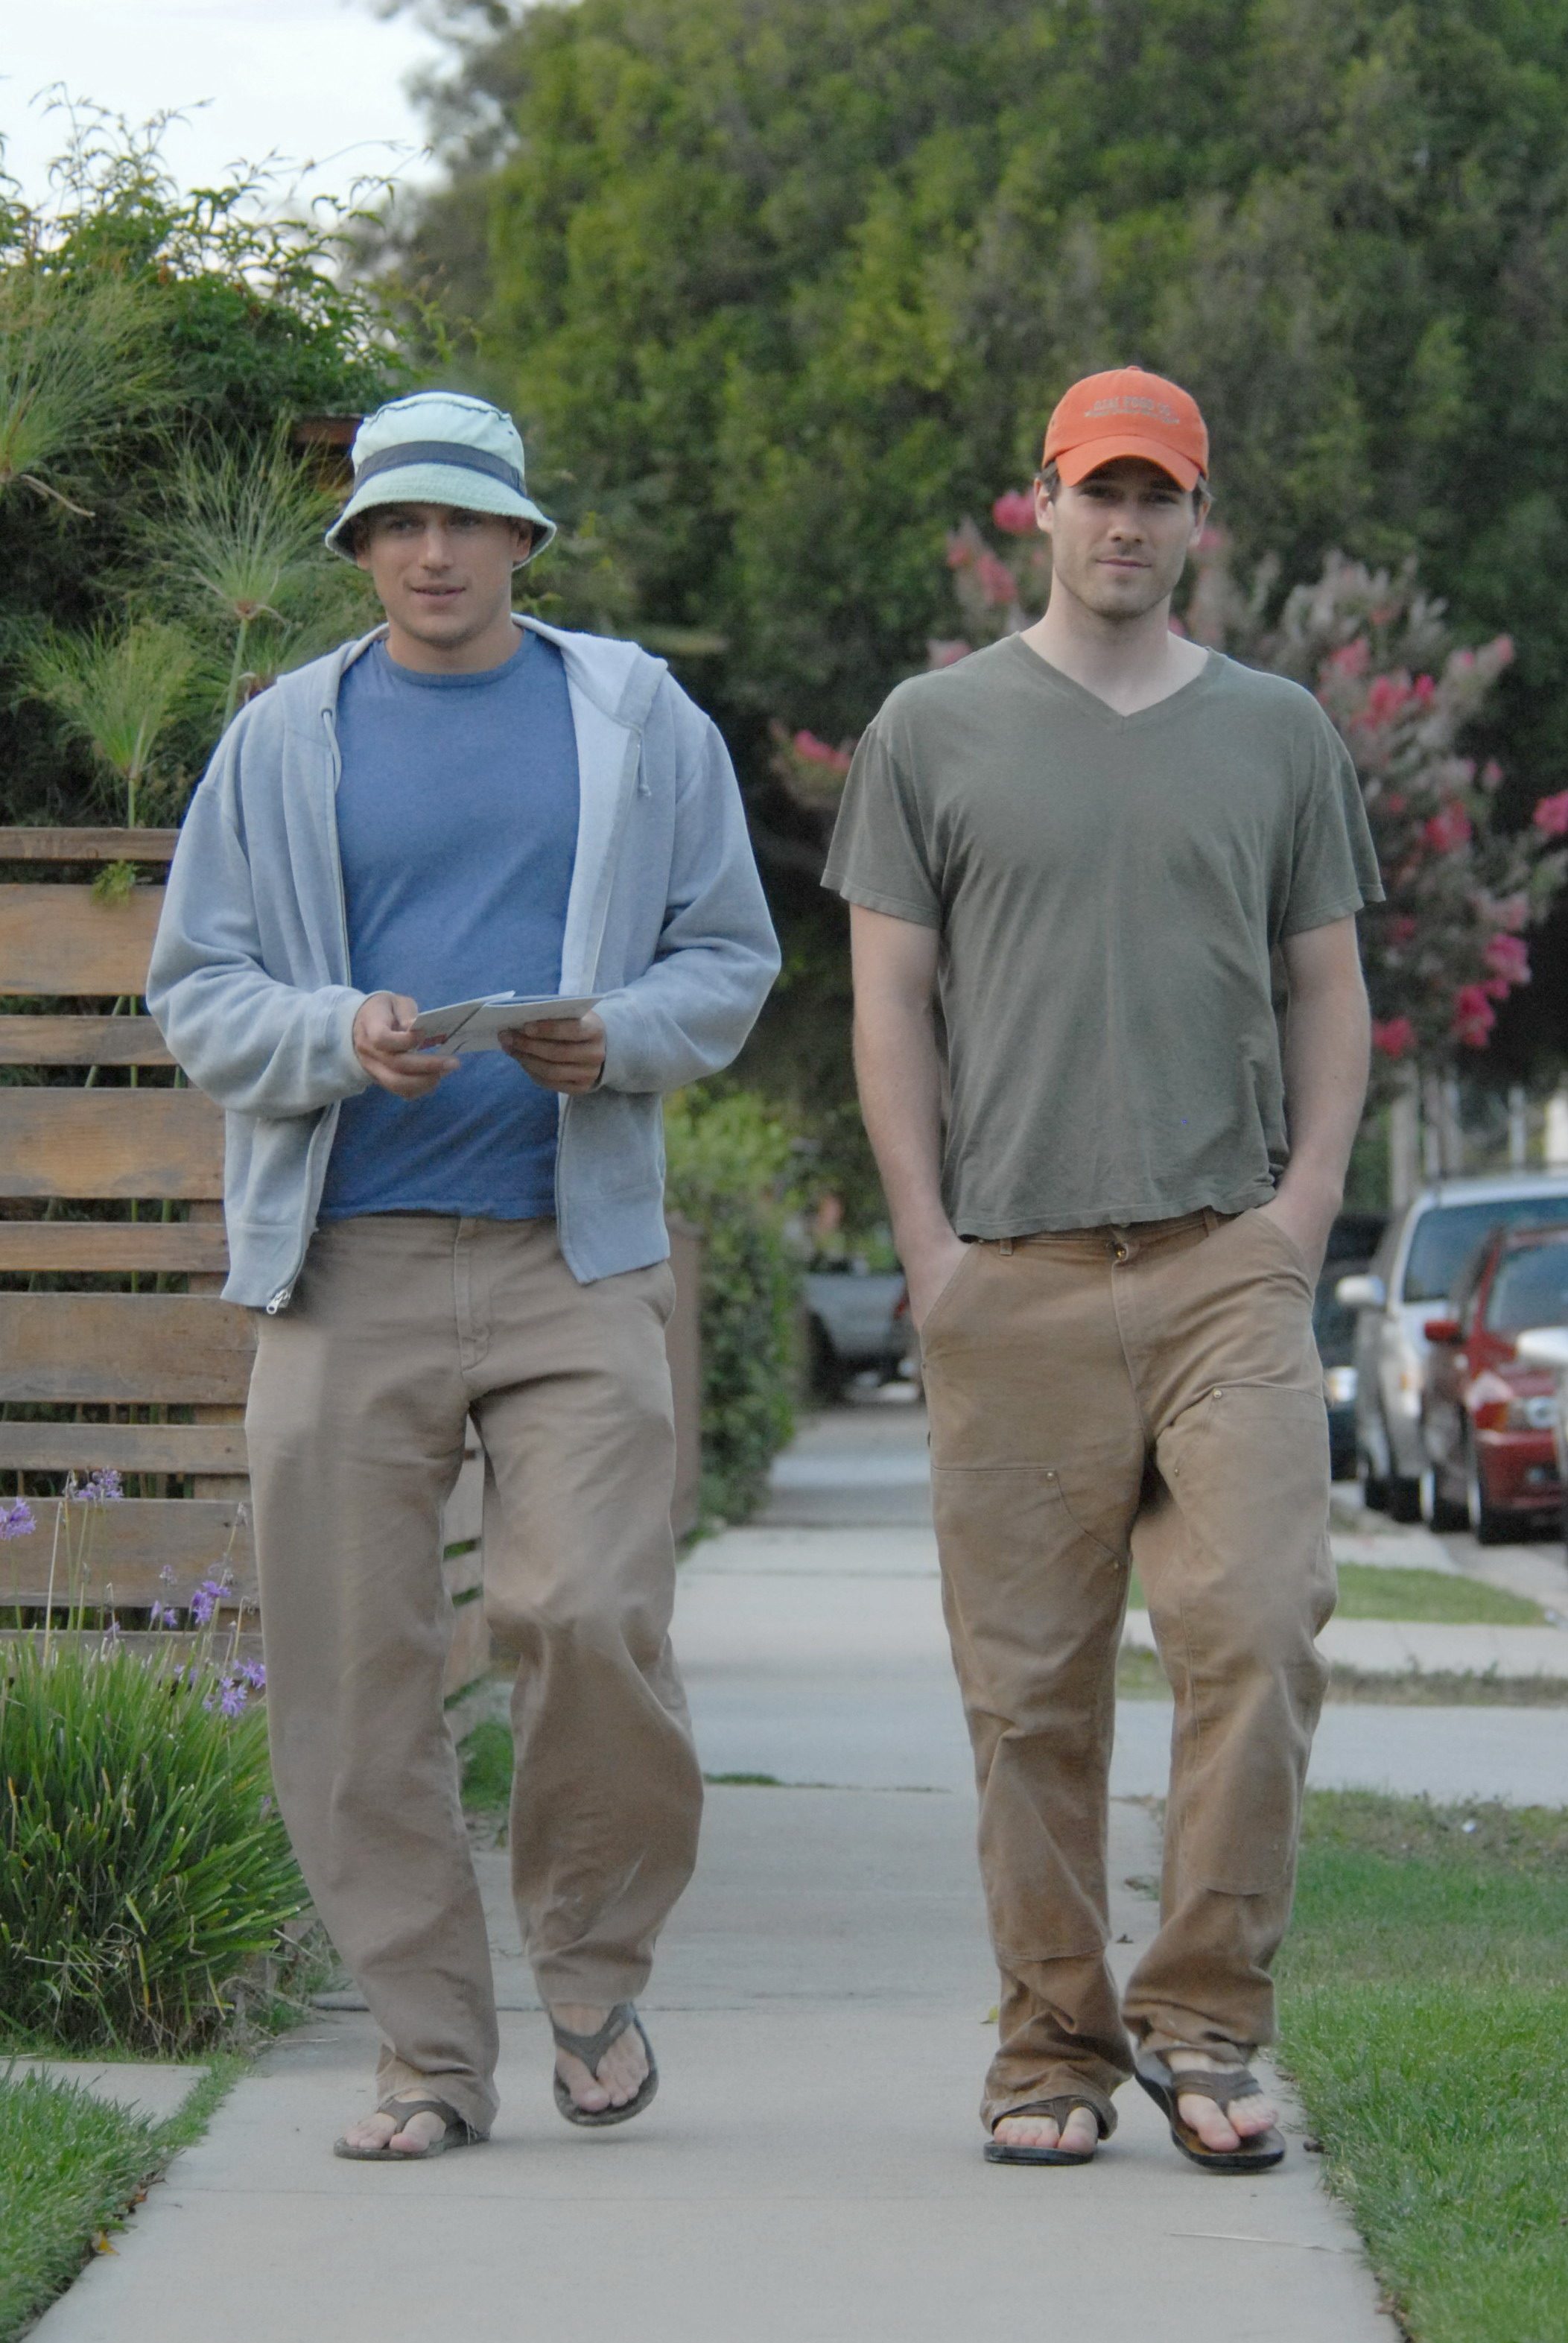 wentworth miller Photo: 08/25/07: Luke and Wentworth Miller in Los Angeles.